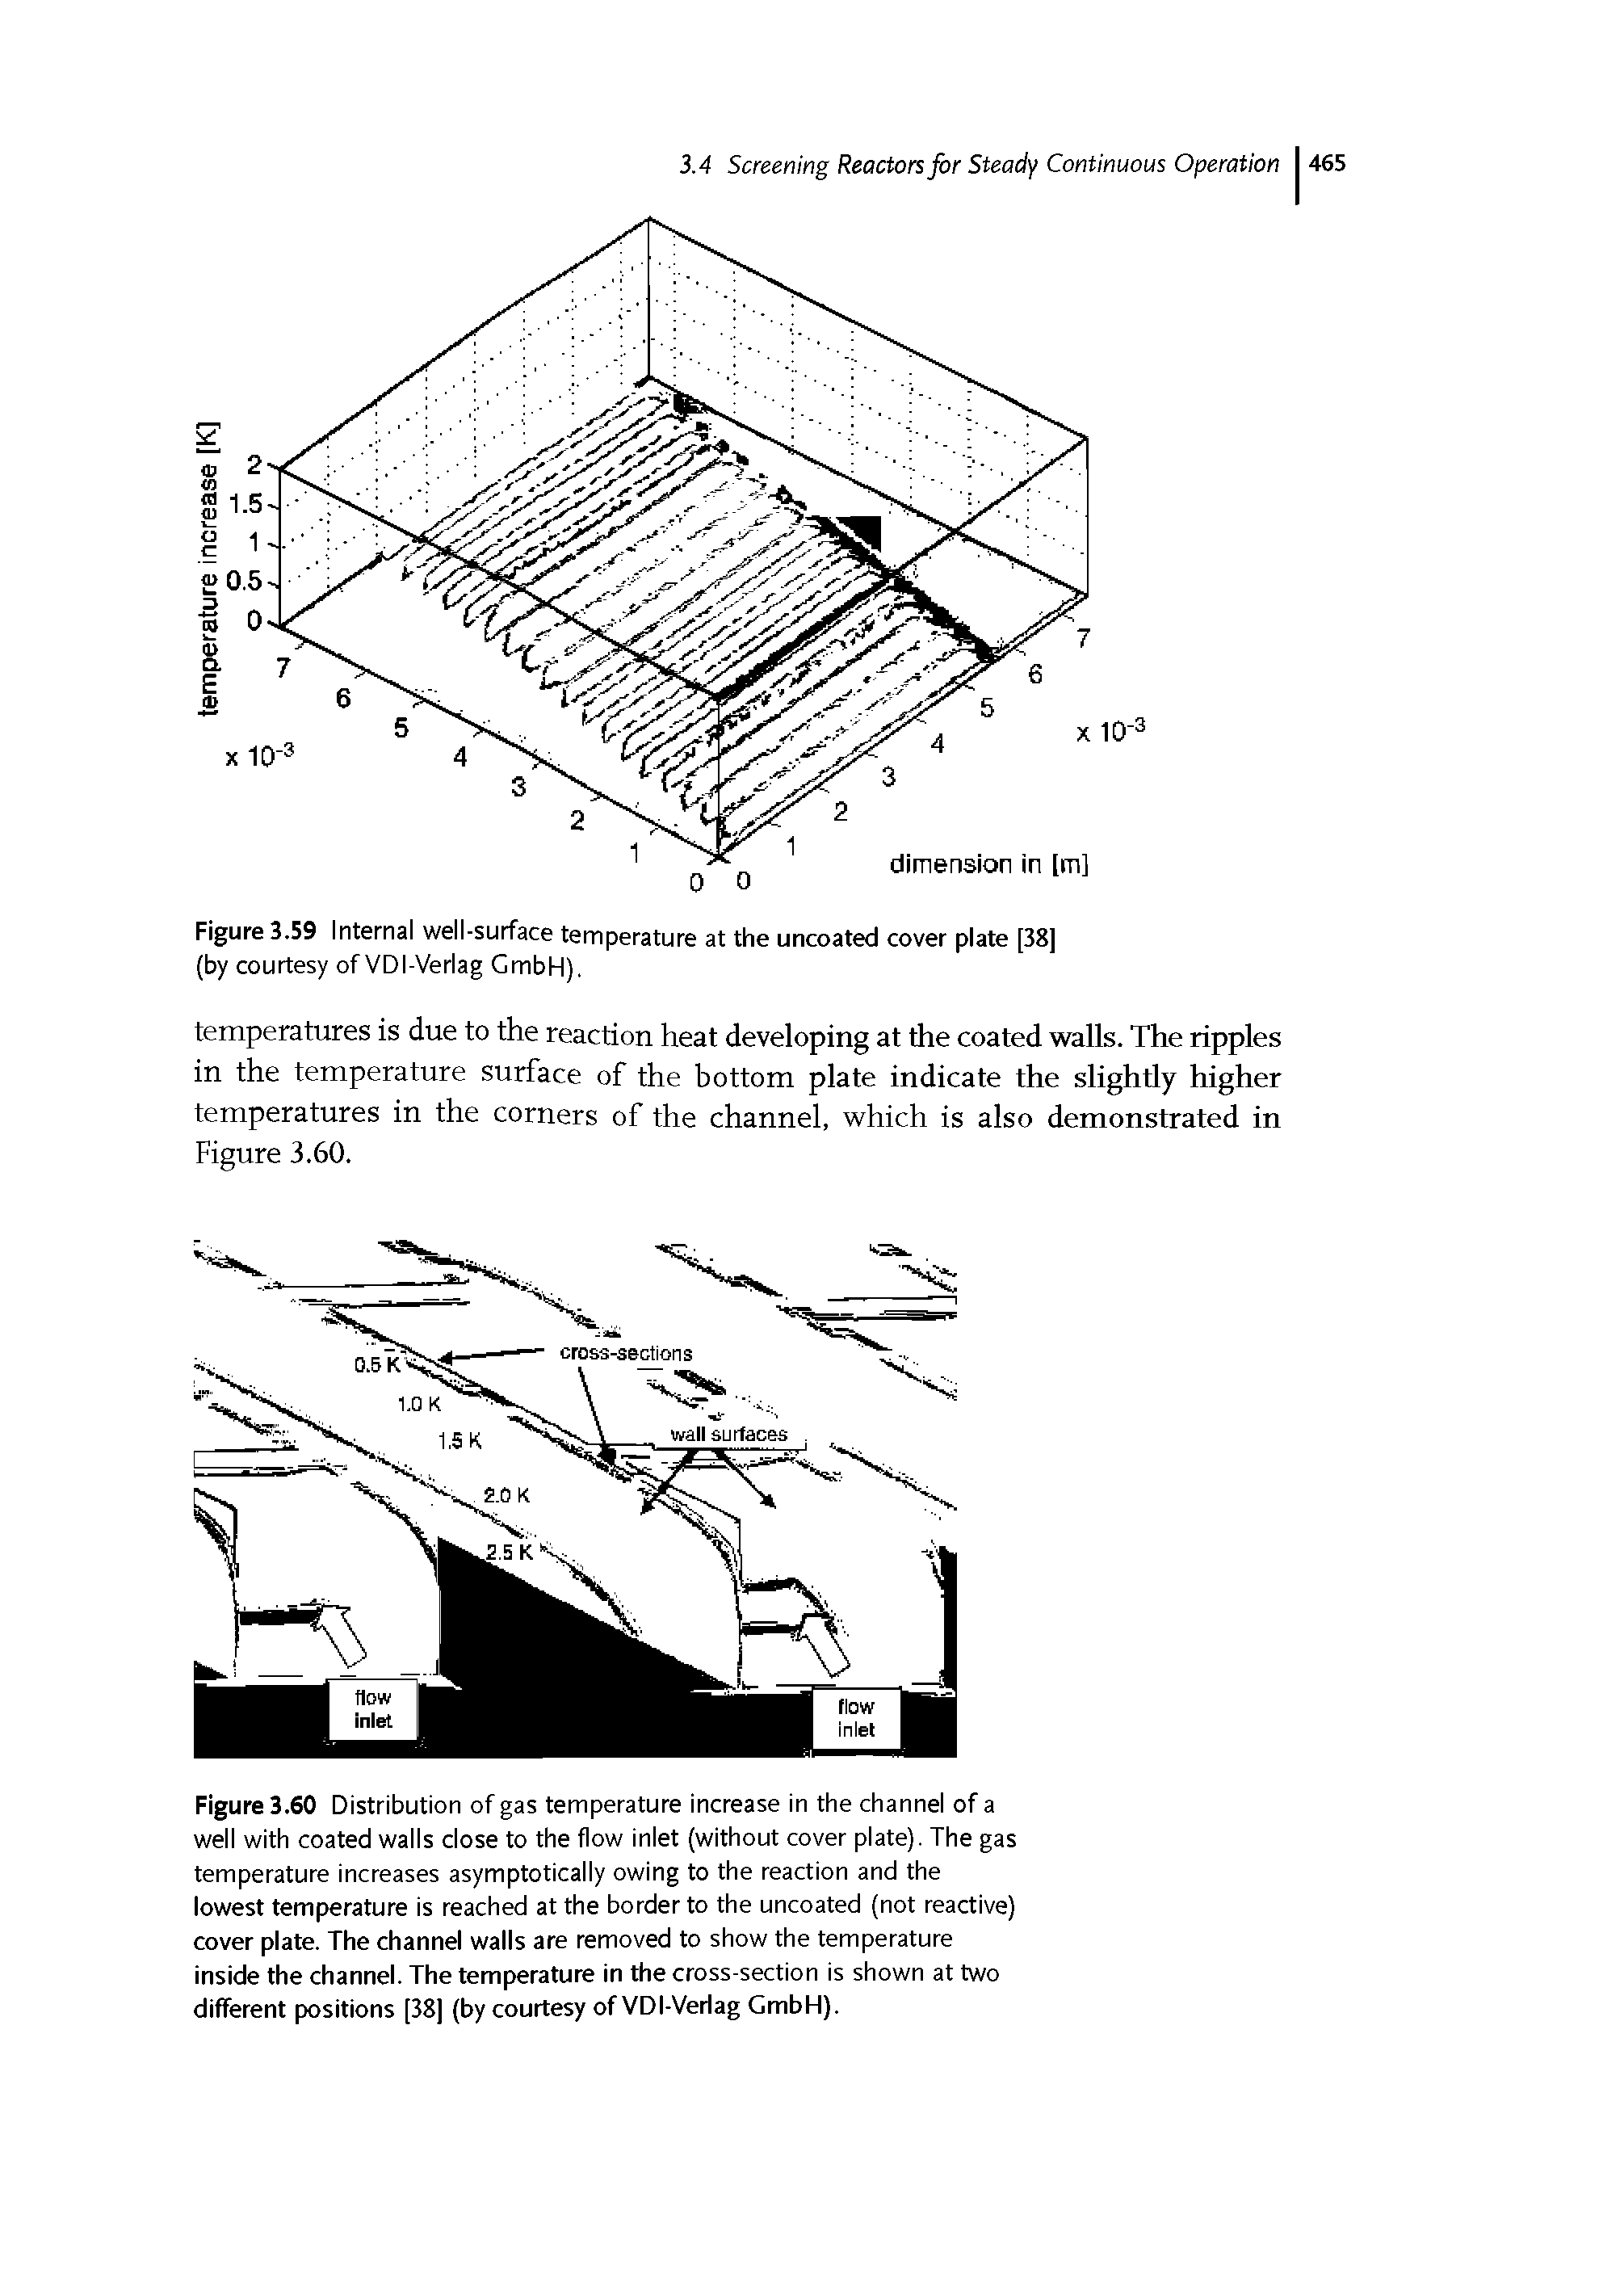 Figure 3.60 Distribution of gas temperature increase in the channel of a well with coated walls close to the flow inlet (without cover plate). The gas temperature increases asymptotically owing to the reaction and the lowest temperature is reached at the border to the uncoated (not reactive) cover plate. The channel walls are removed to show the temperature inside the channel. The temperature in the cross-section is shown at two different positions [38] (by courtesy ofVDI-Verlag GmbH).